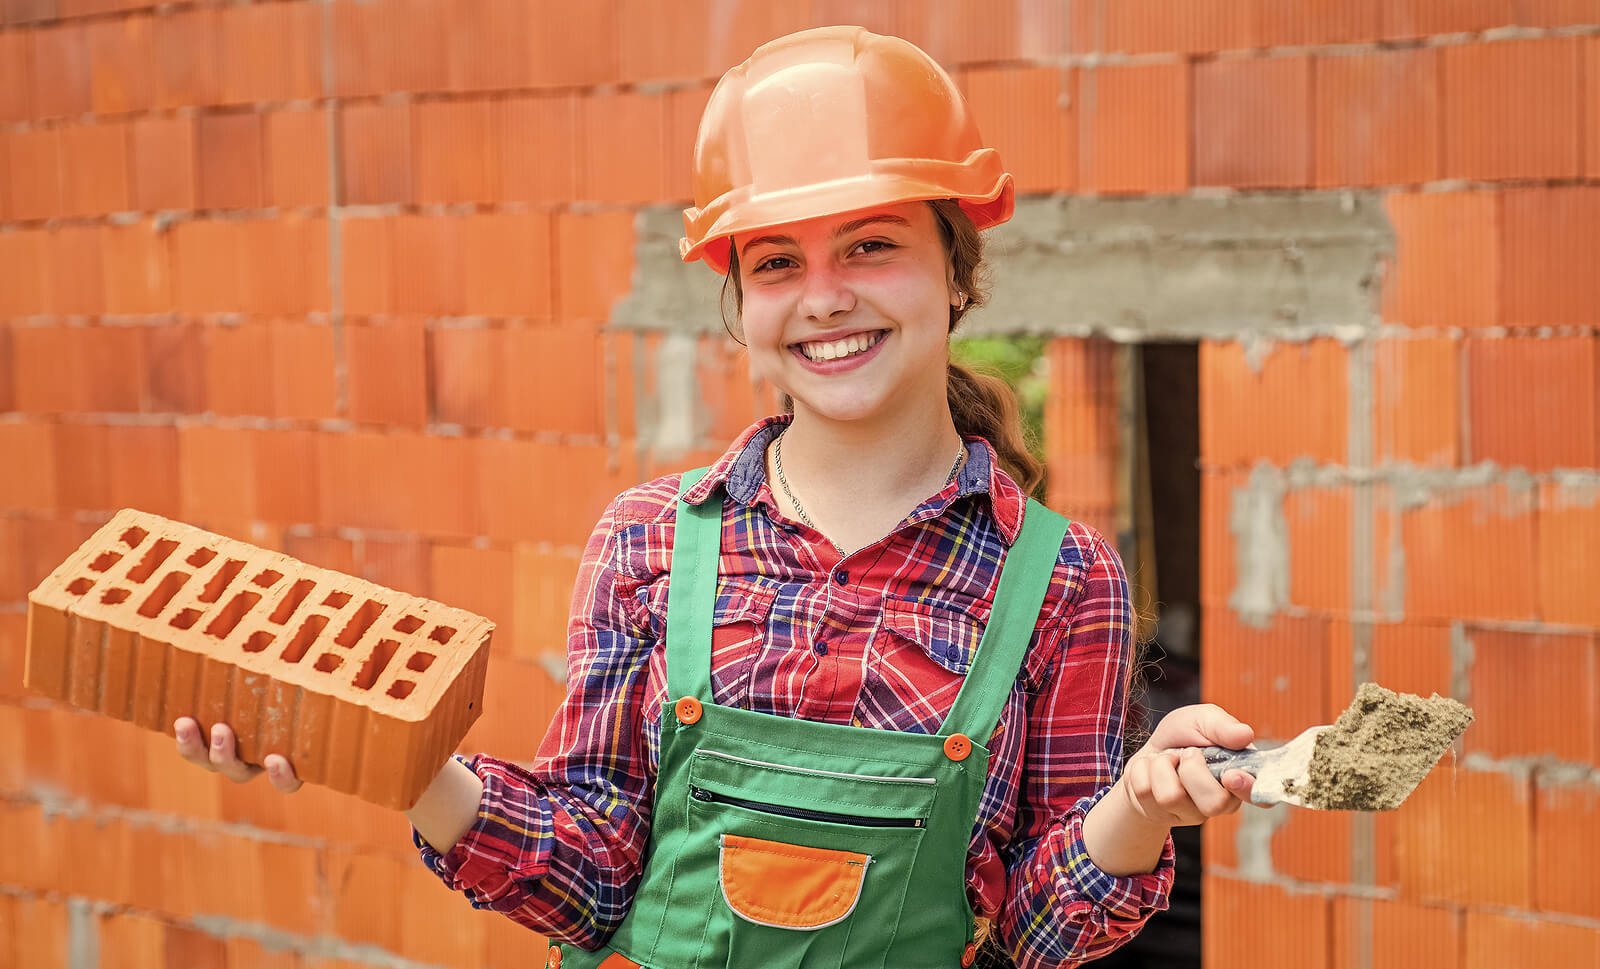 A teenage girl helping to build a brick wall.